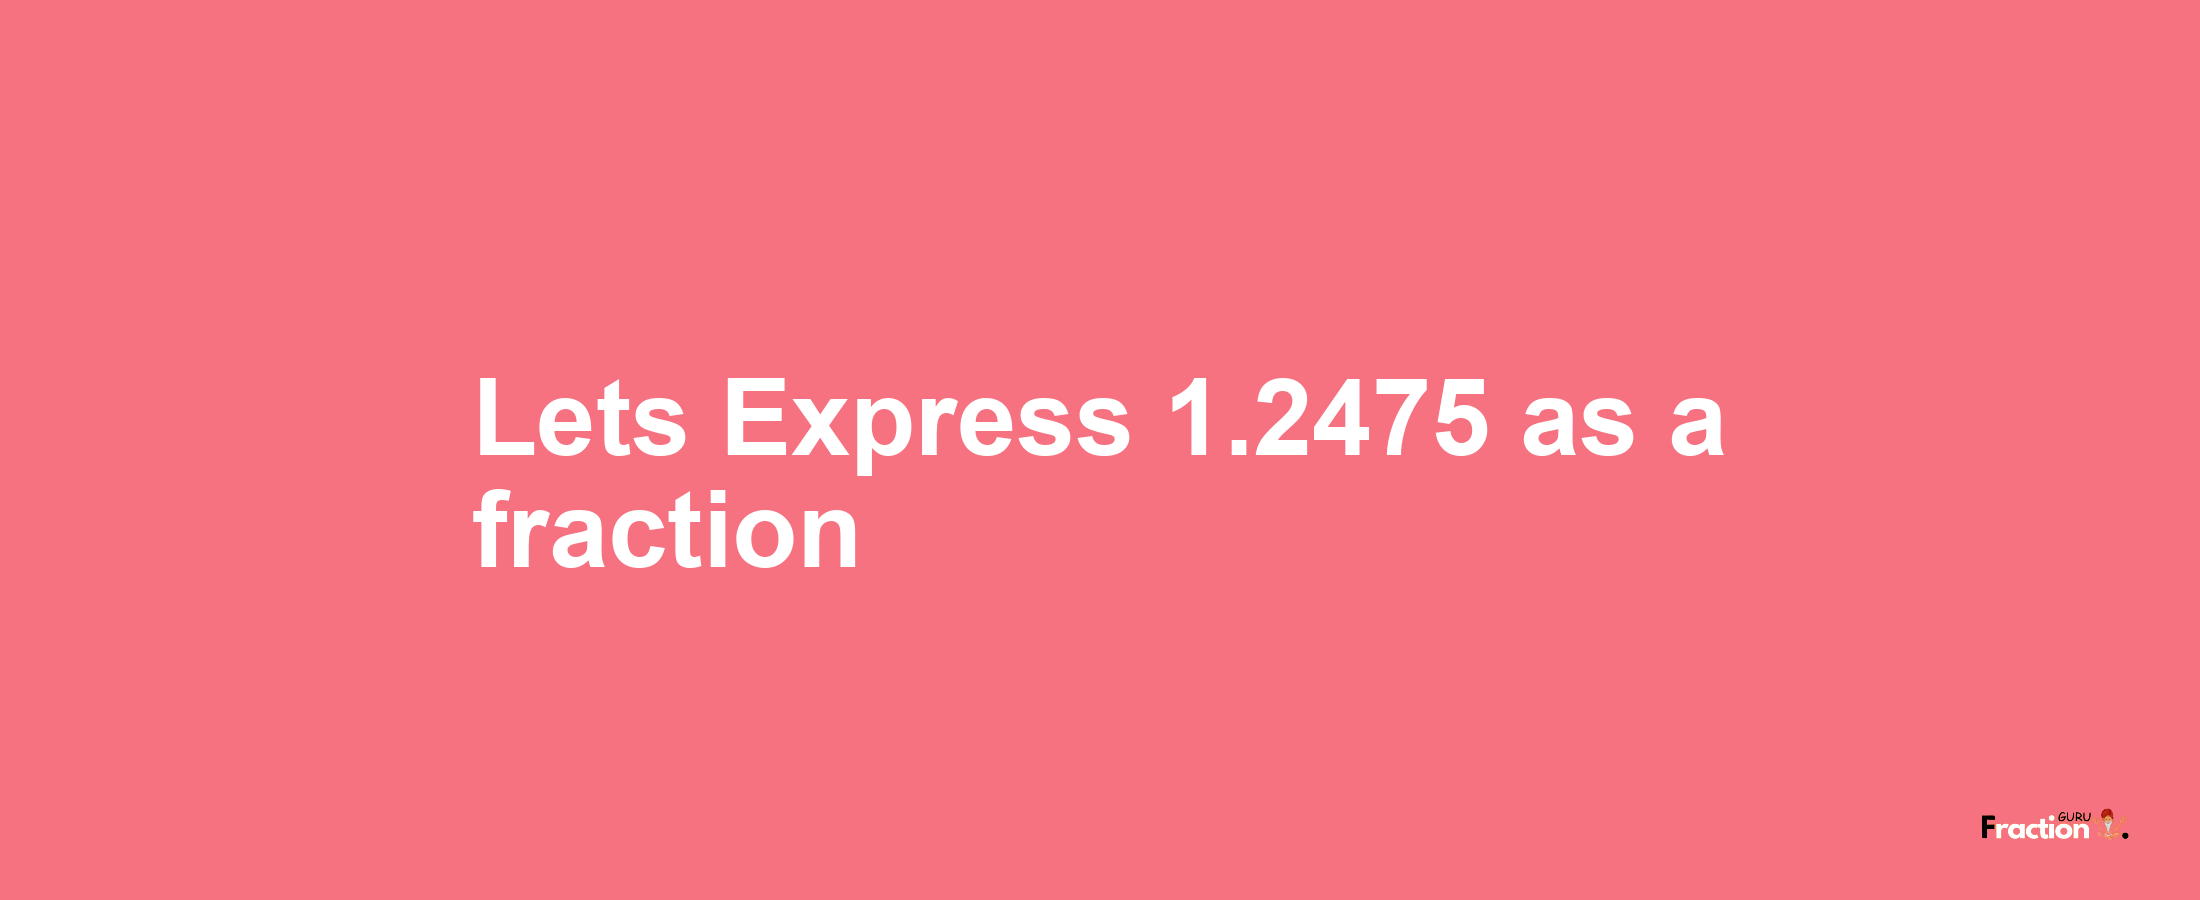 Lets Express 1.2475 as afraction